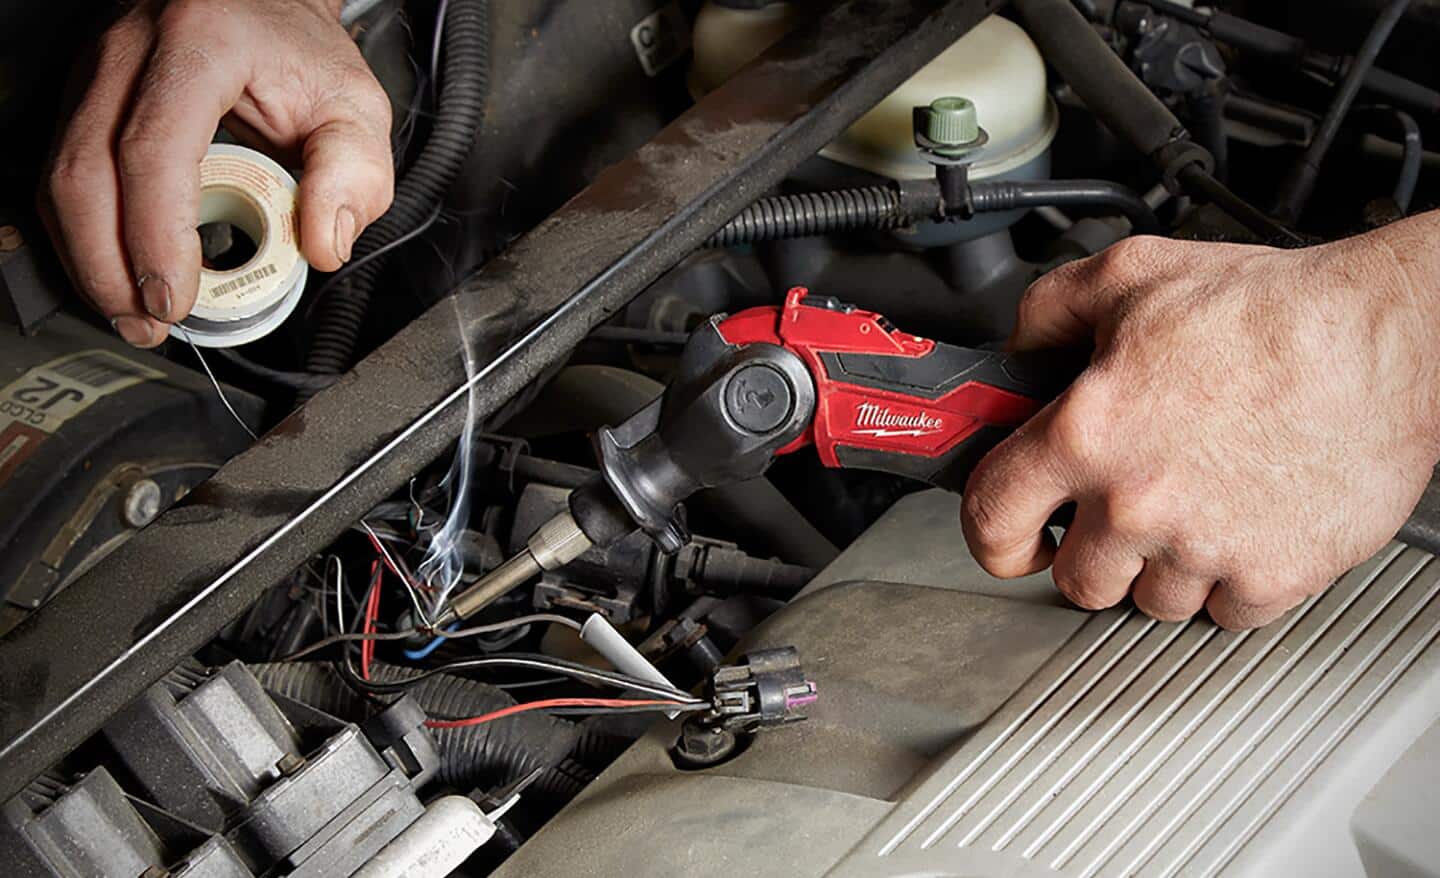 A battery powered soldering iron being used to make electrical connections in a vehicle.